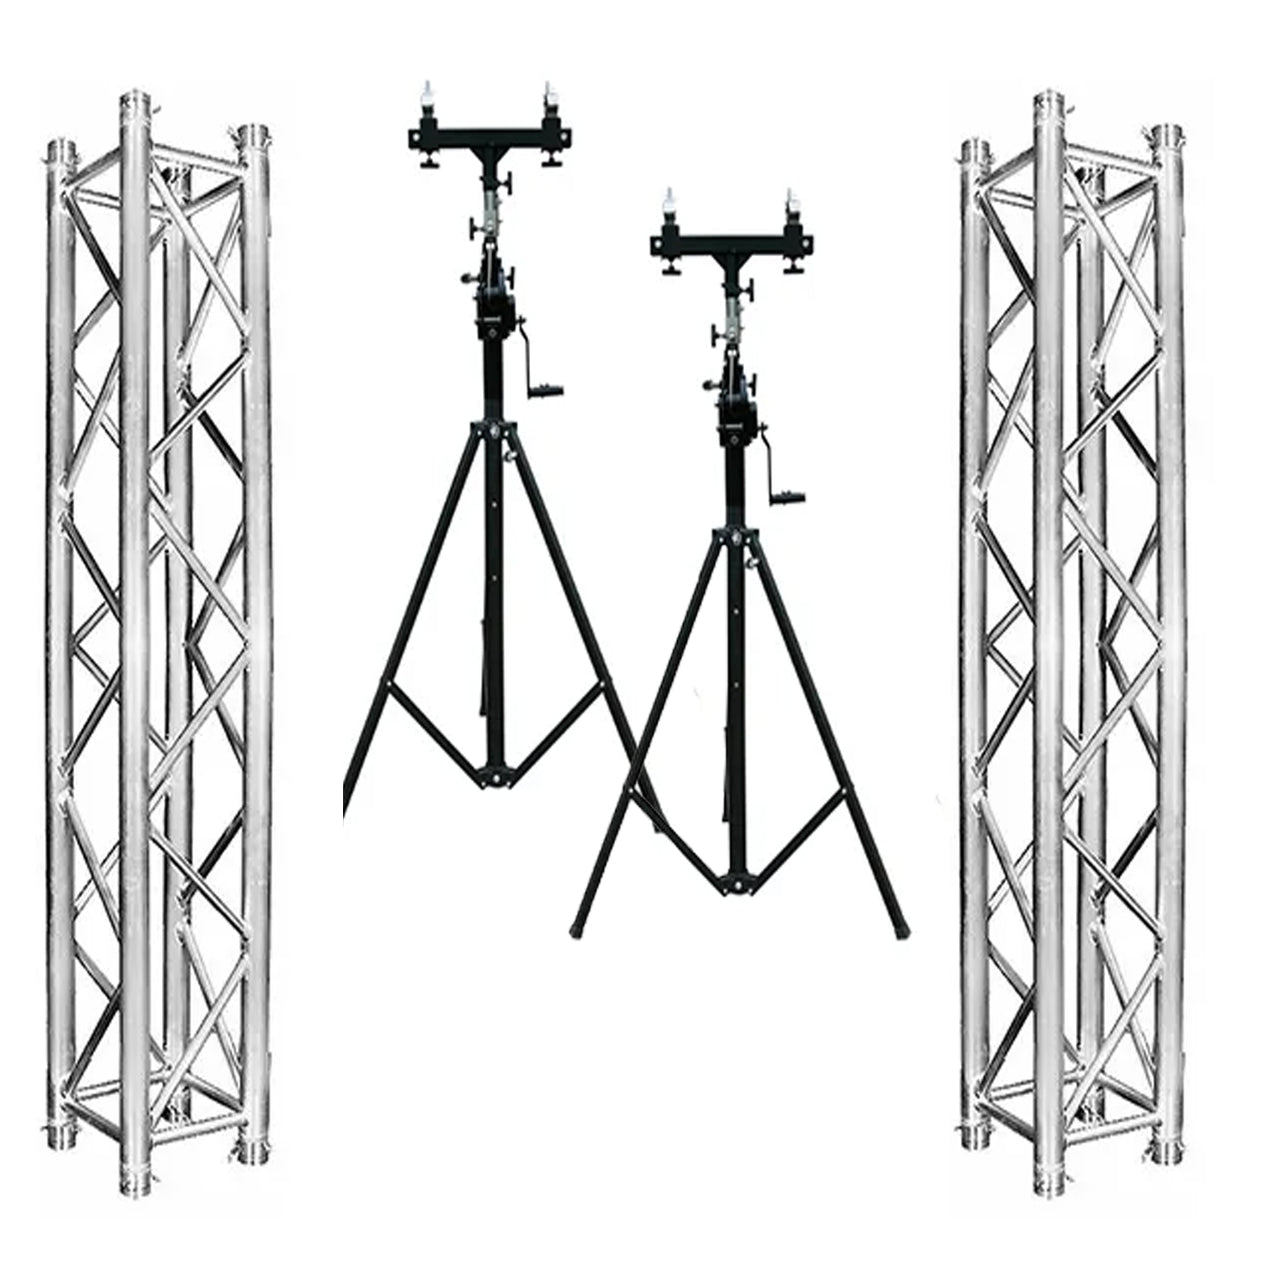 MR DJ Crank-up Portable 10' Lighting Stand with 12' Truss Package